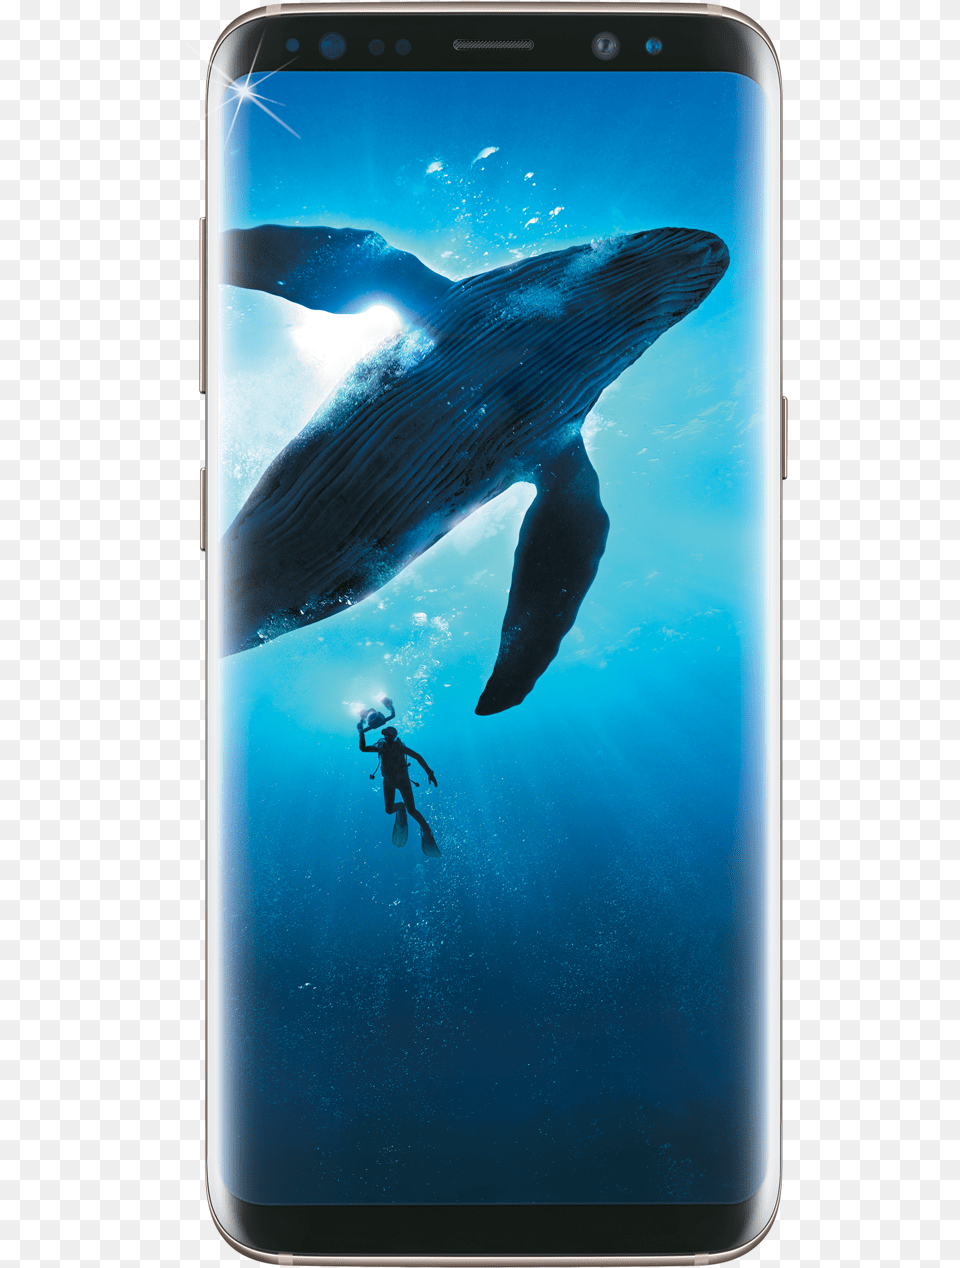 Samsung Galaxy S8 Samsung Galaxy S8 Price In India, Adventure, Water, Sport, Scuba Diving Free Png Download